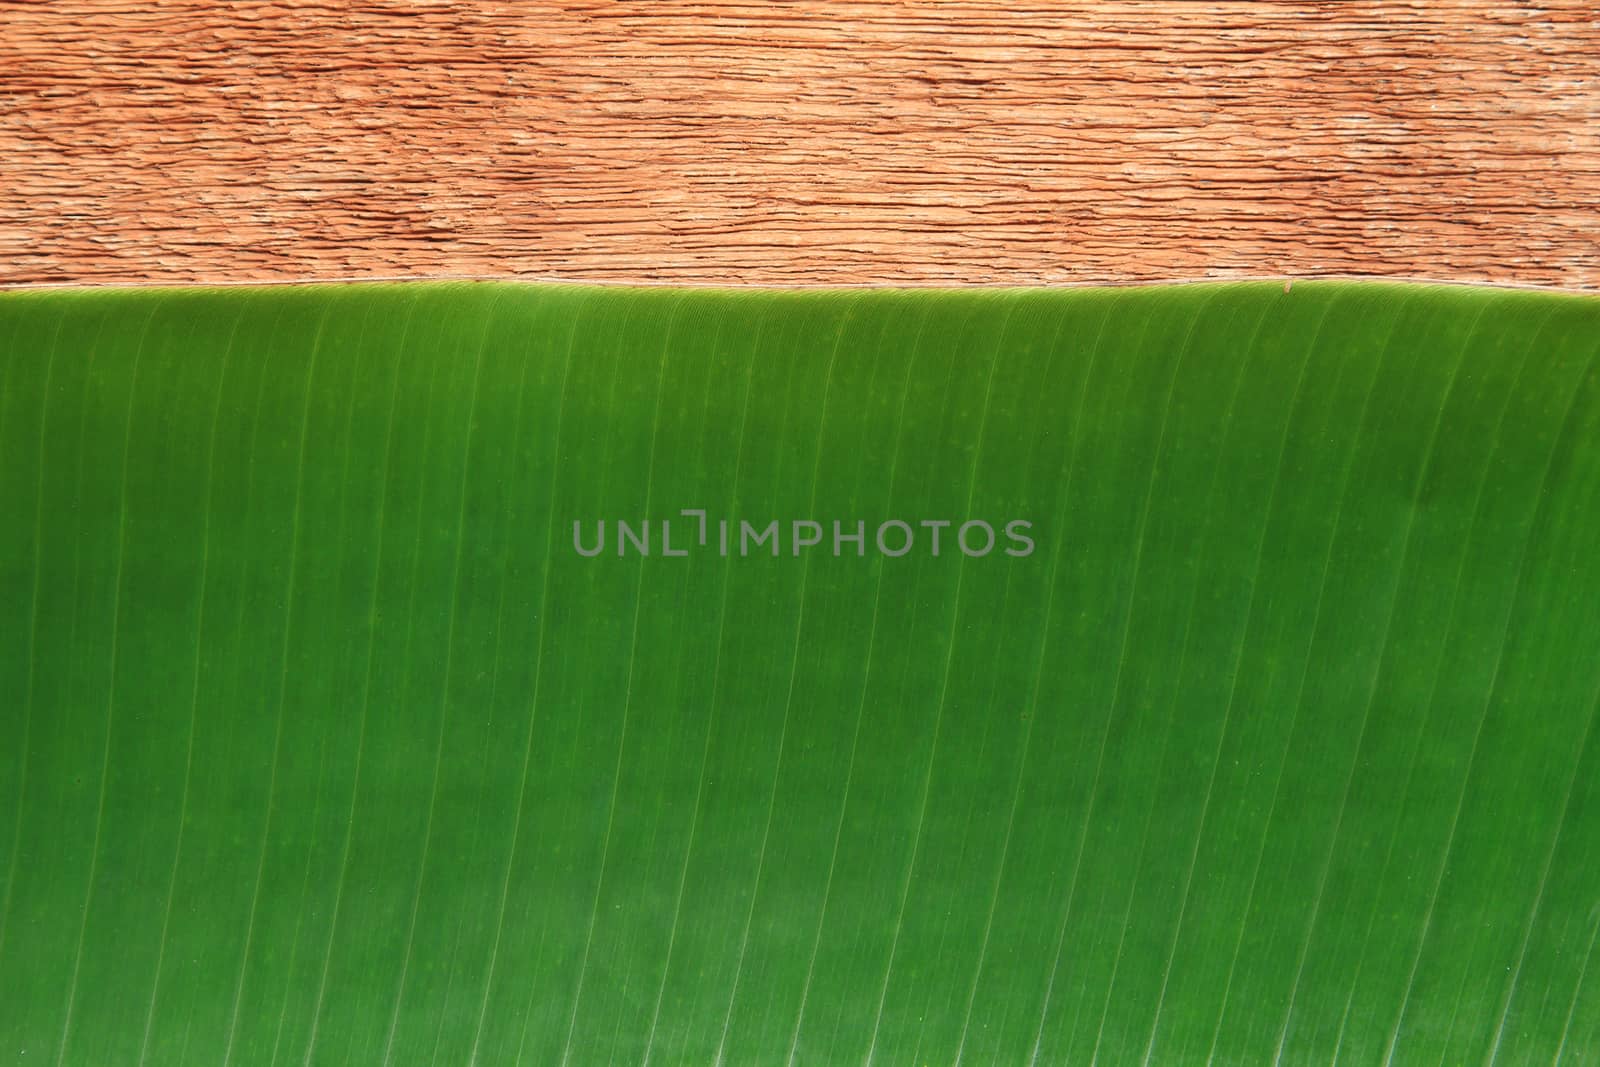 Banana leaf on the wooden board by foto76